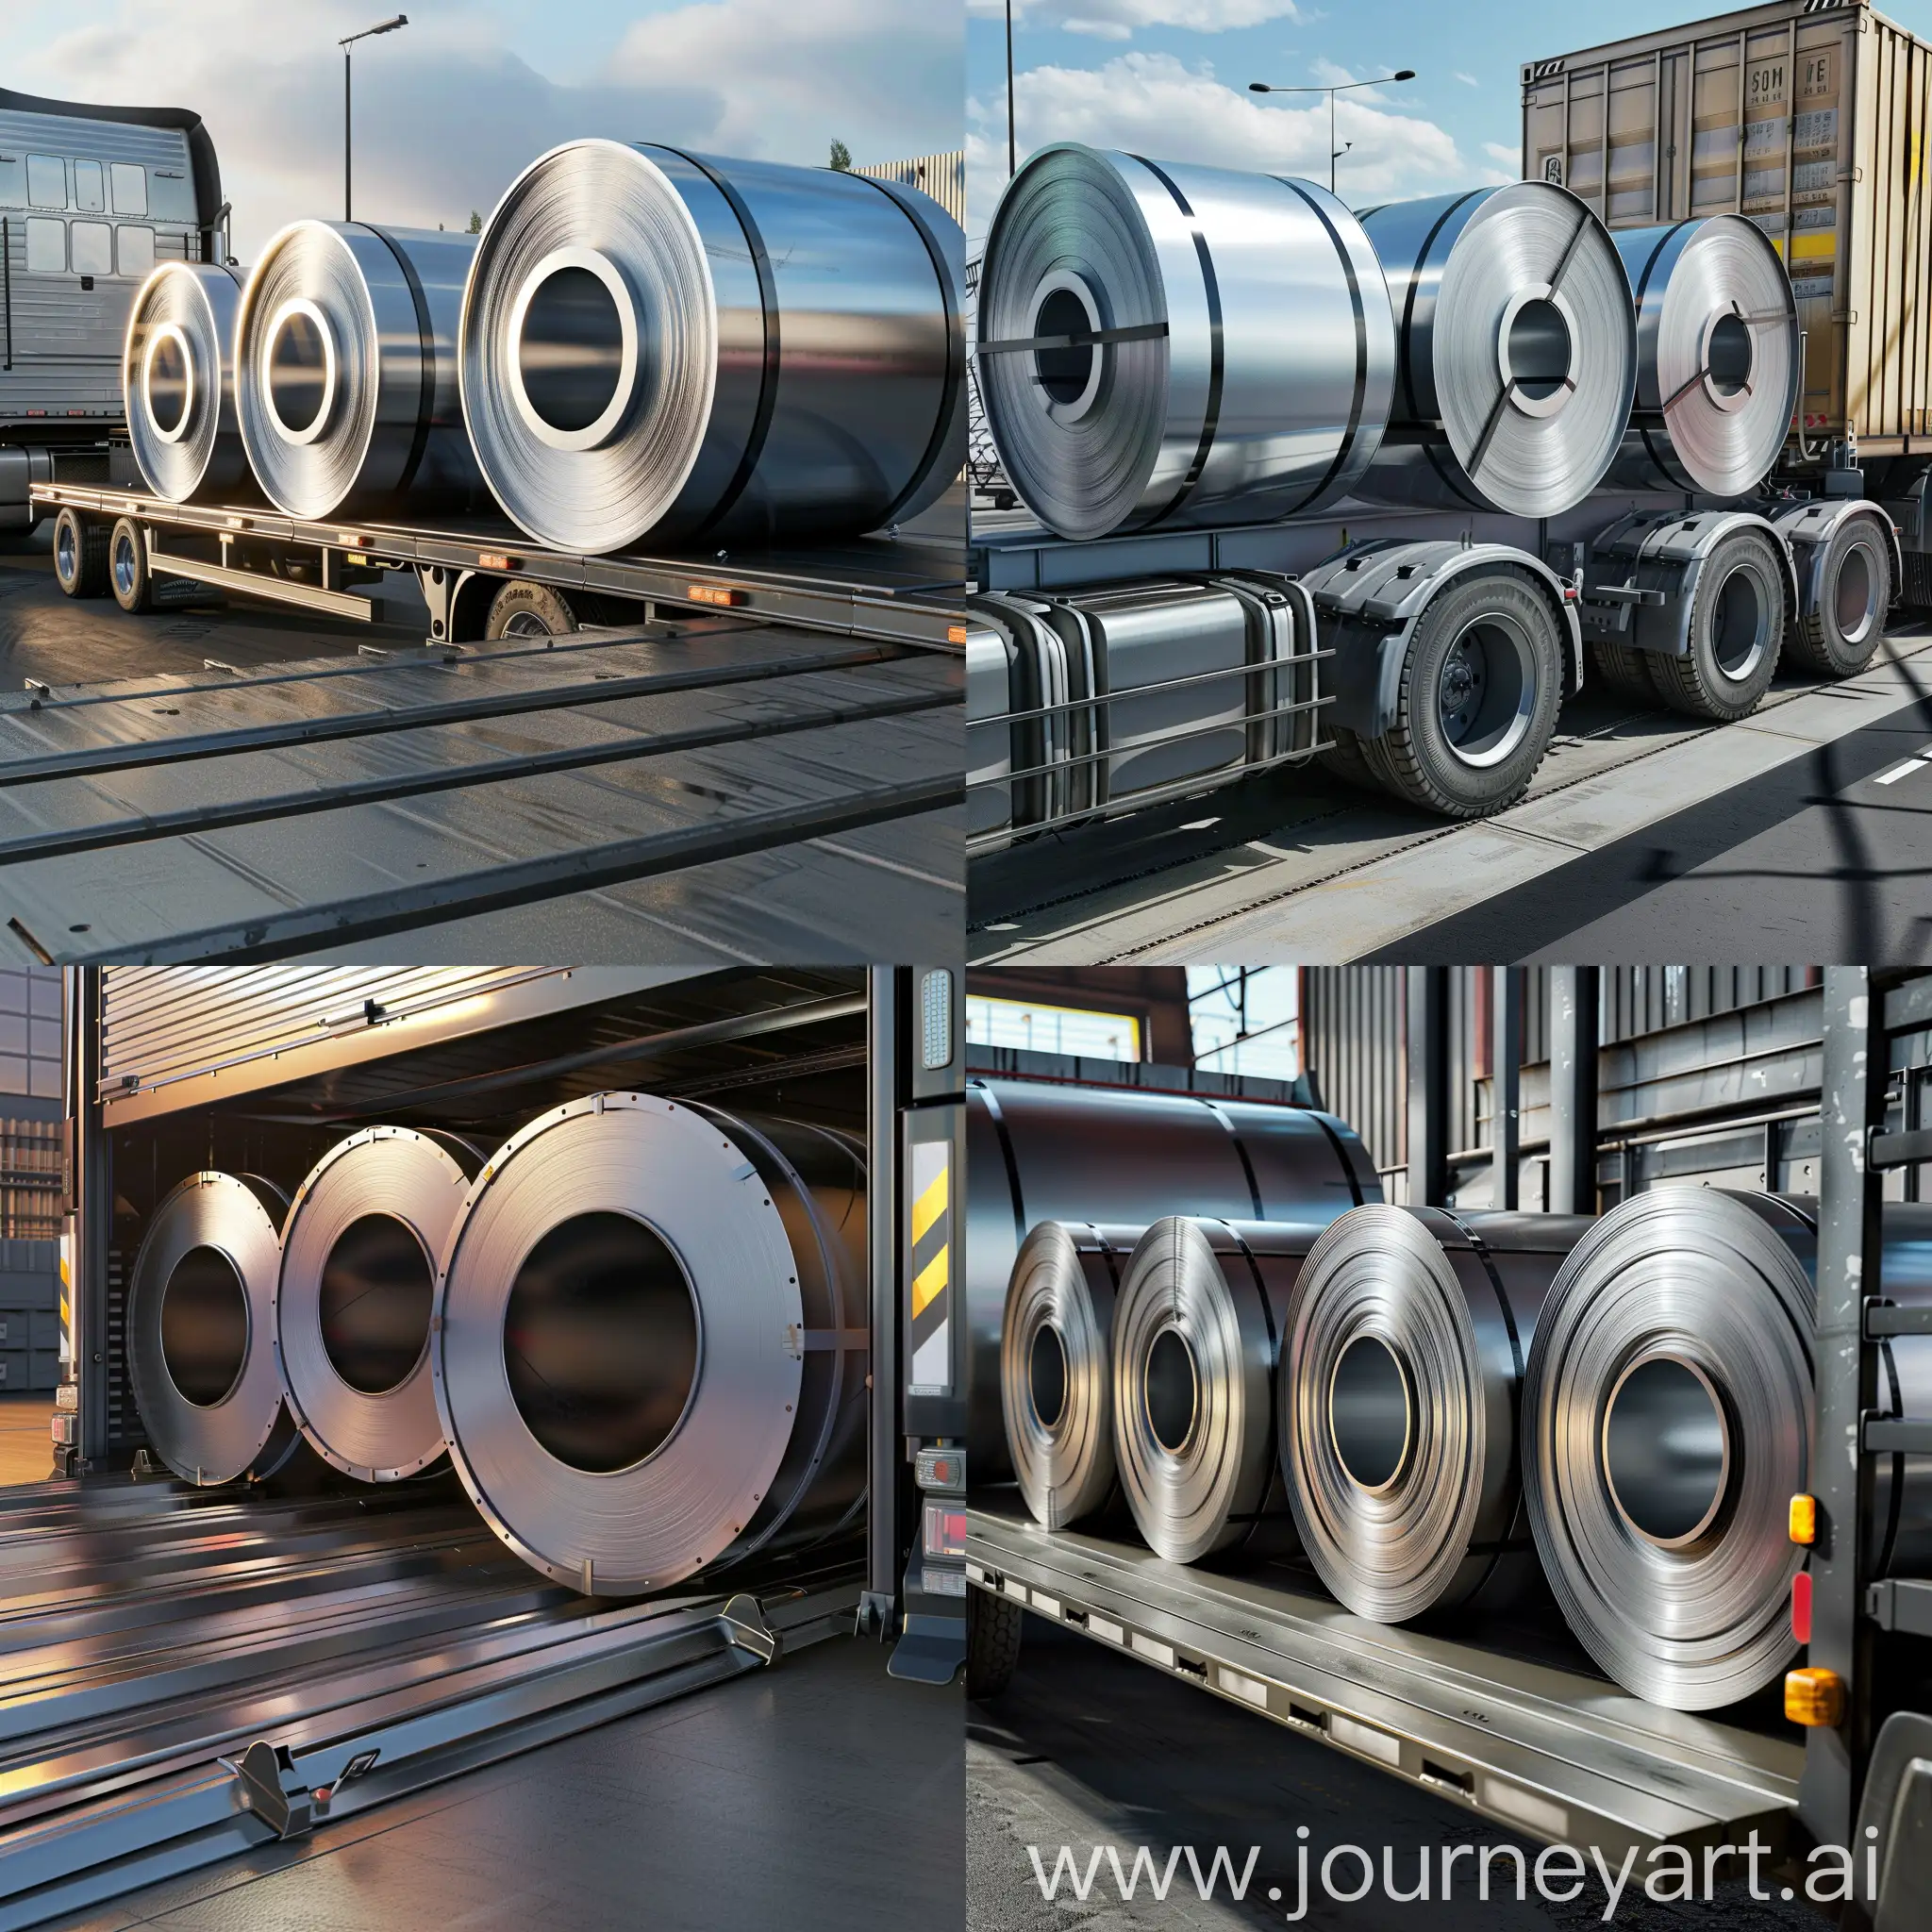 Create a realistic image of 3 steel rolls loading onto a truck with a background, show the truck face and load section in one image